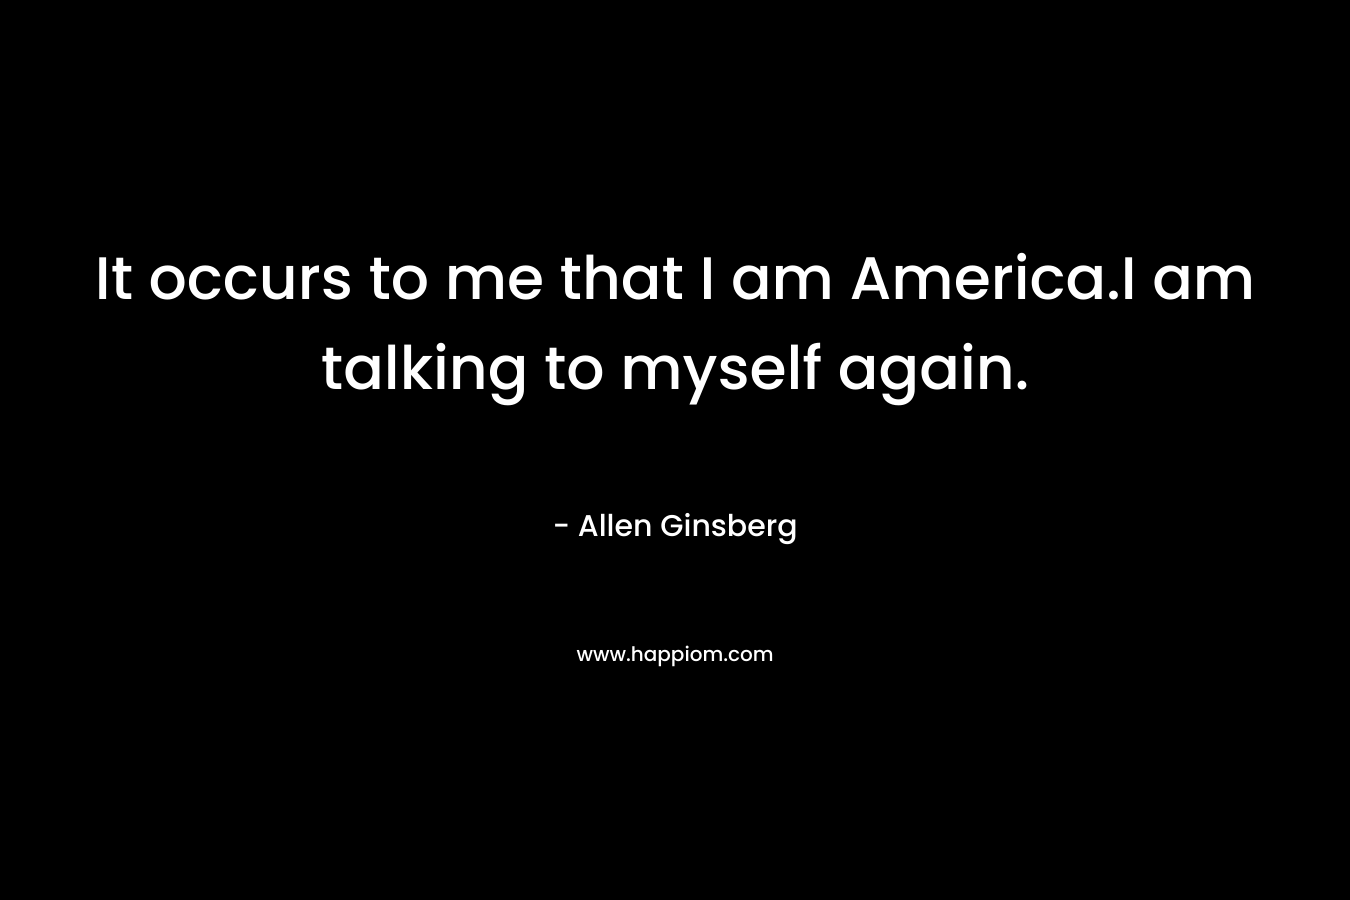 It occurs to me that I am America.I am talking to myself again.